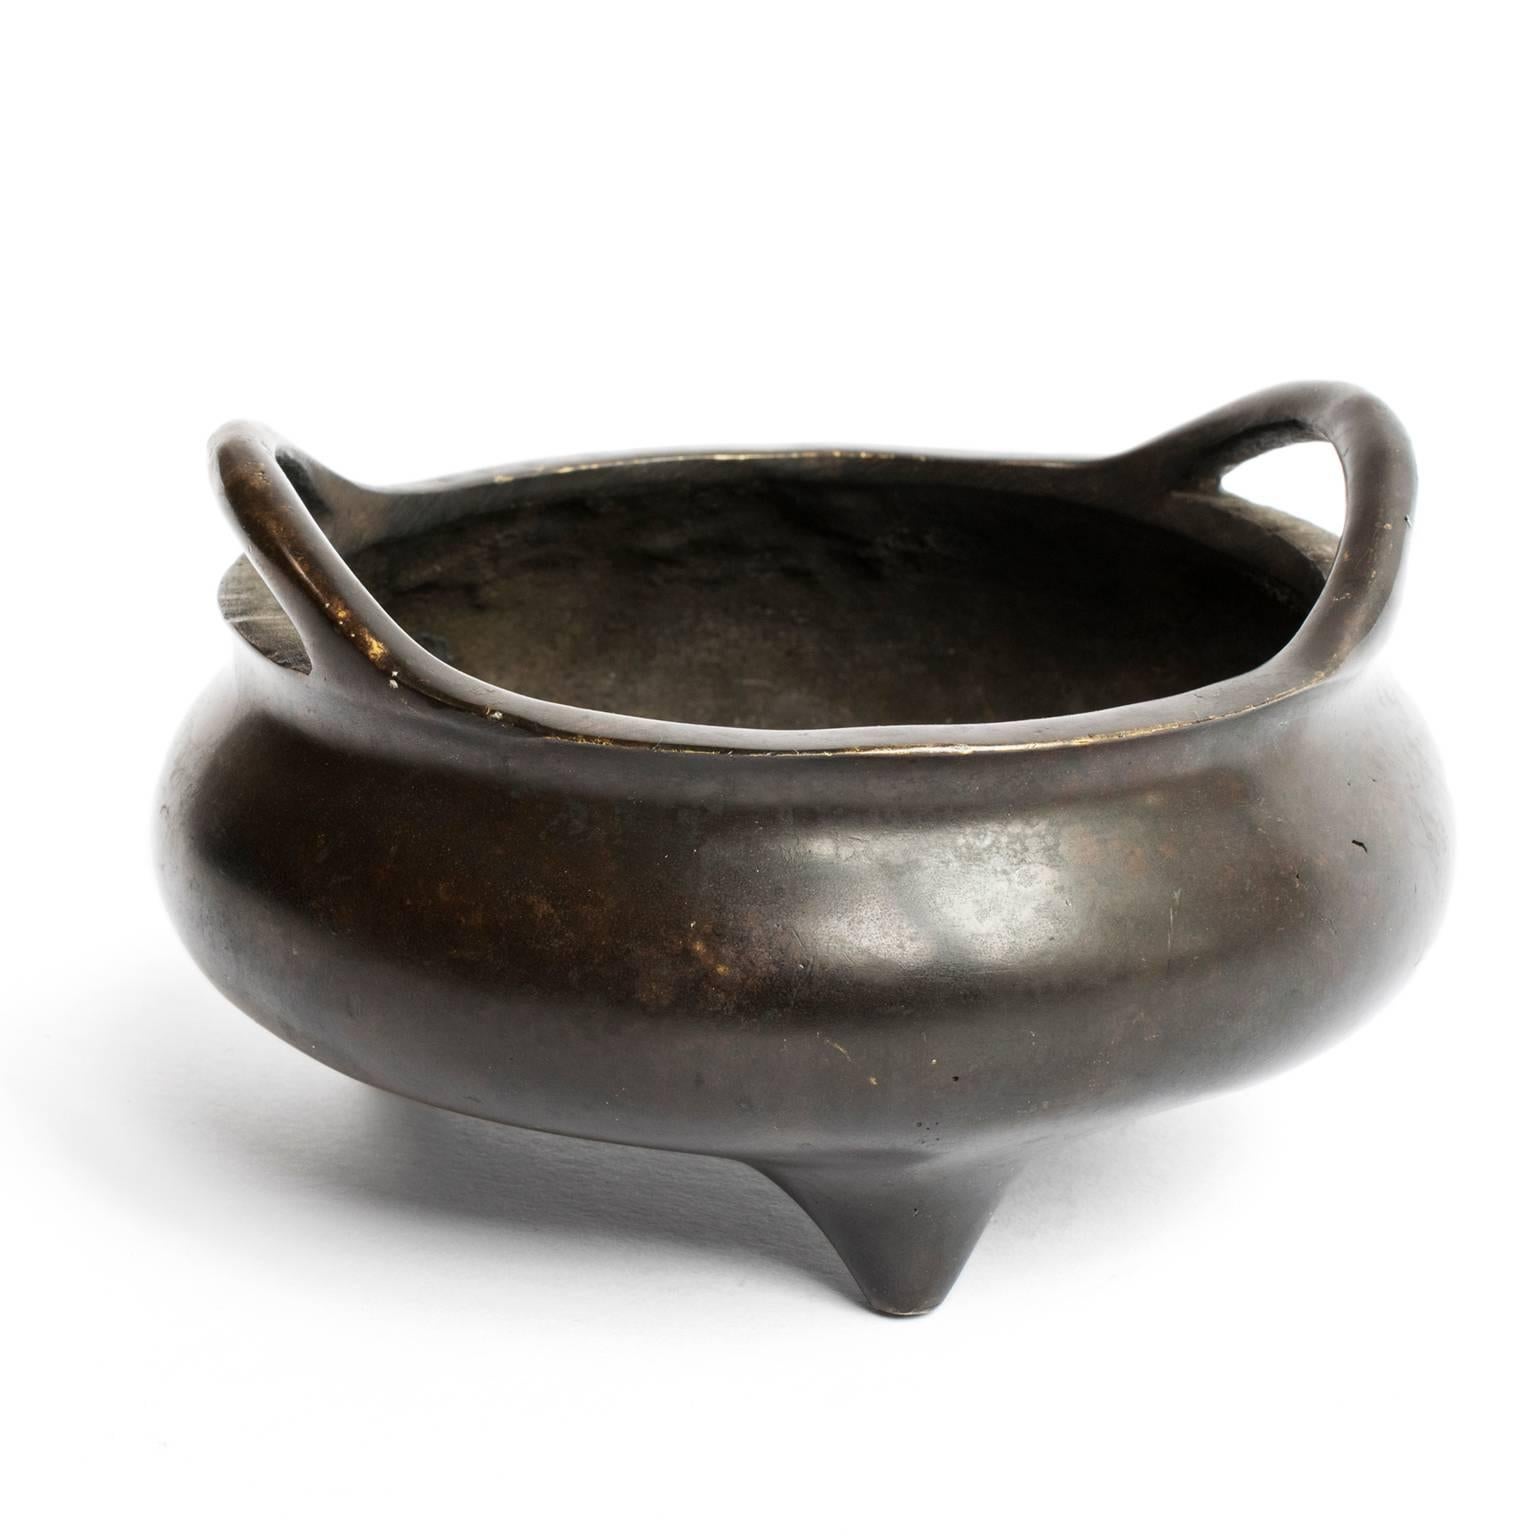 For many centuries people in China have burned incense in censers—like this one—to help purify the air in their homes, or honour their ancestors and religious deities. This unique bronze censer was made in the early 20th century but the form